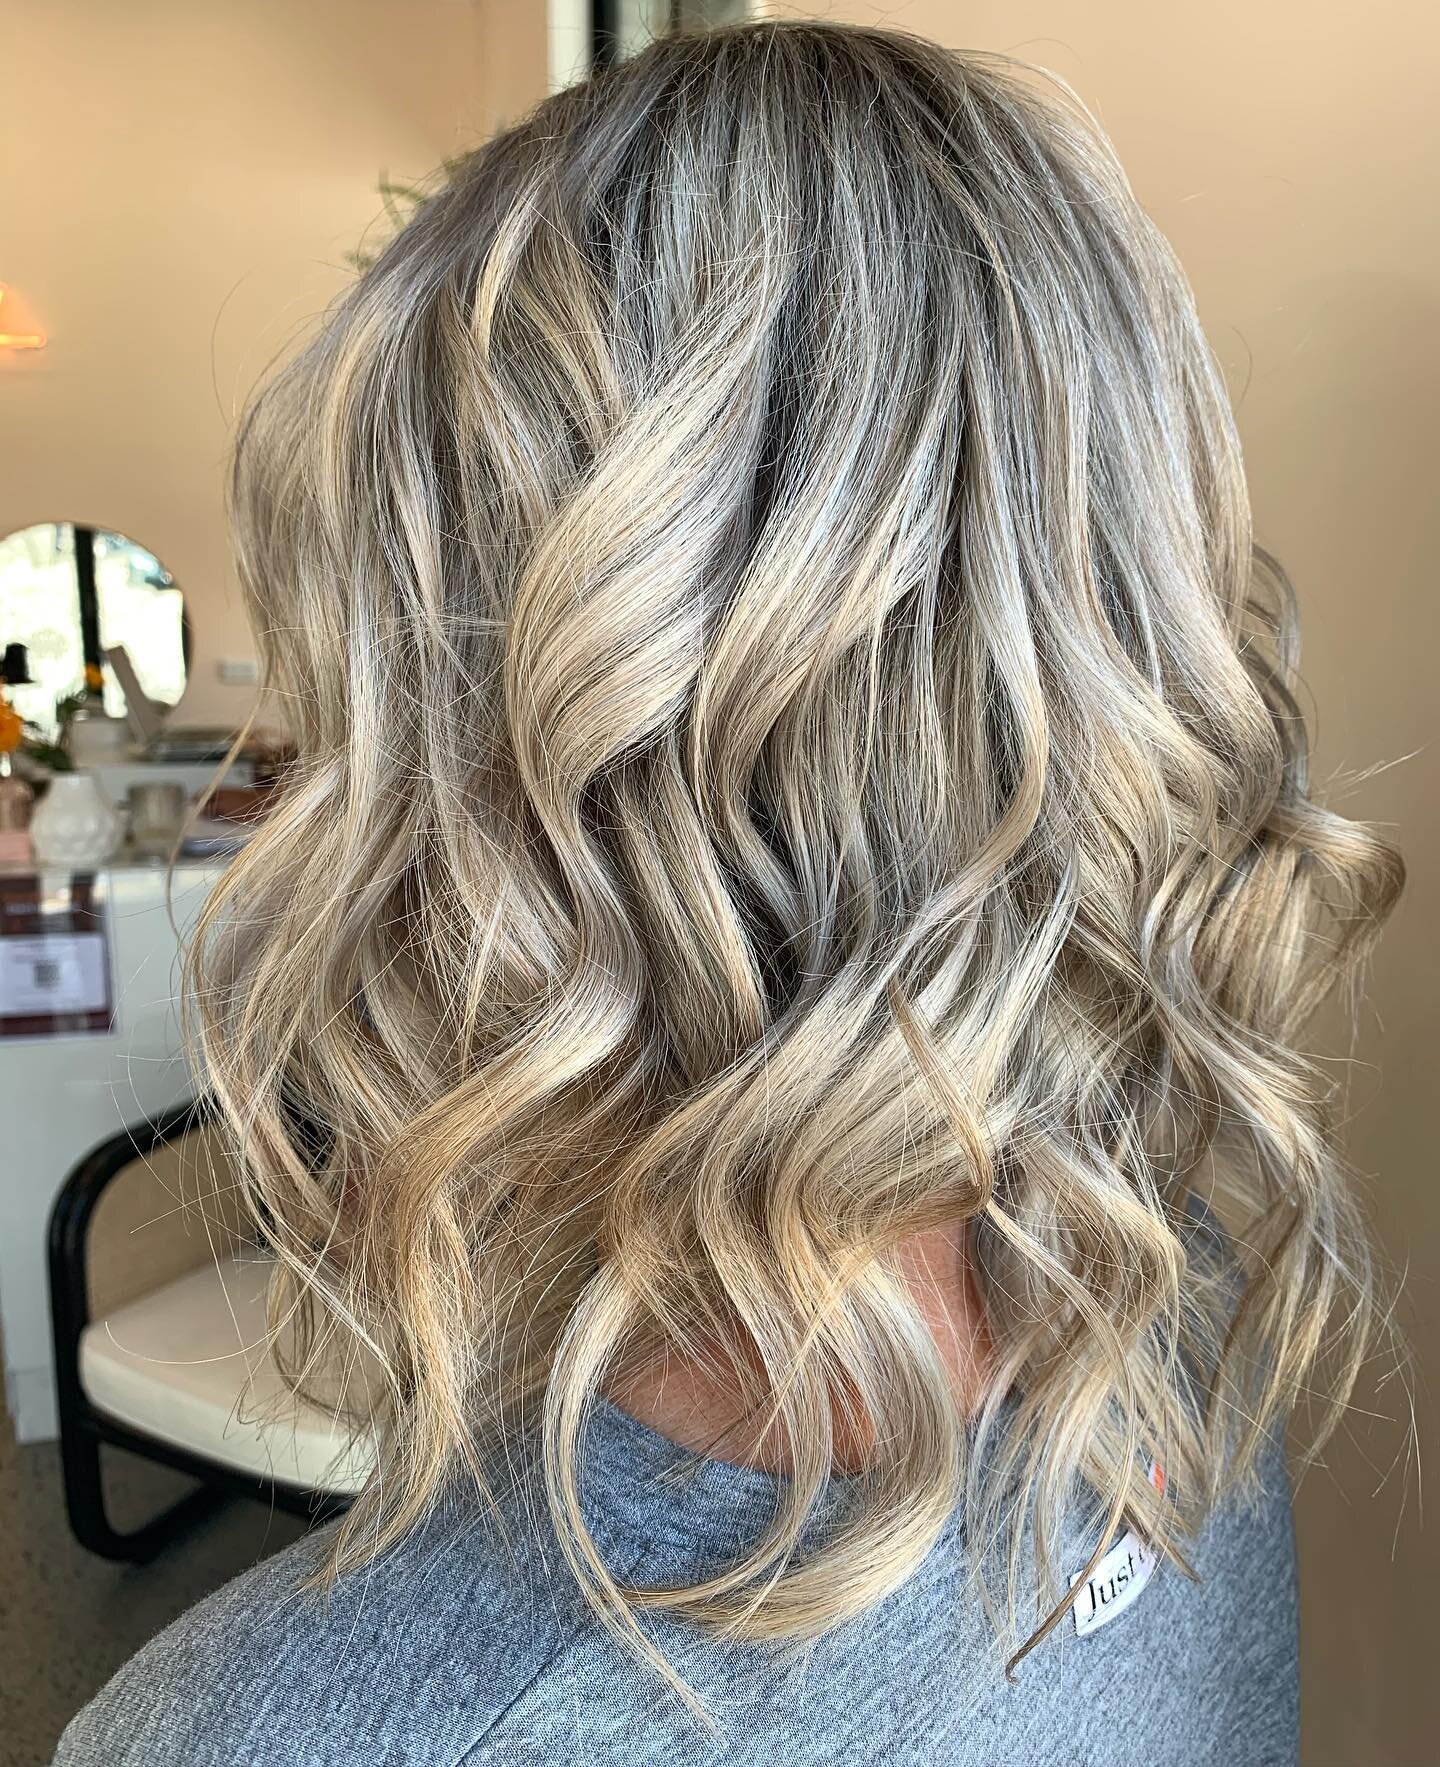 Wanting your blonde to look icy ❄️ cool? Adding some depth in the right places will make your blonde look light and glowy! Still a few spaces left for the year check out our website for availabilities, pricing and book online. 
.
.
.
.
#brisbanelife 